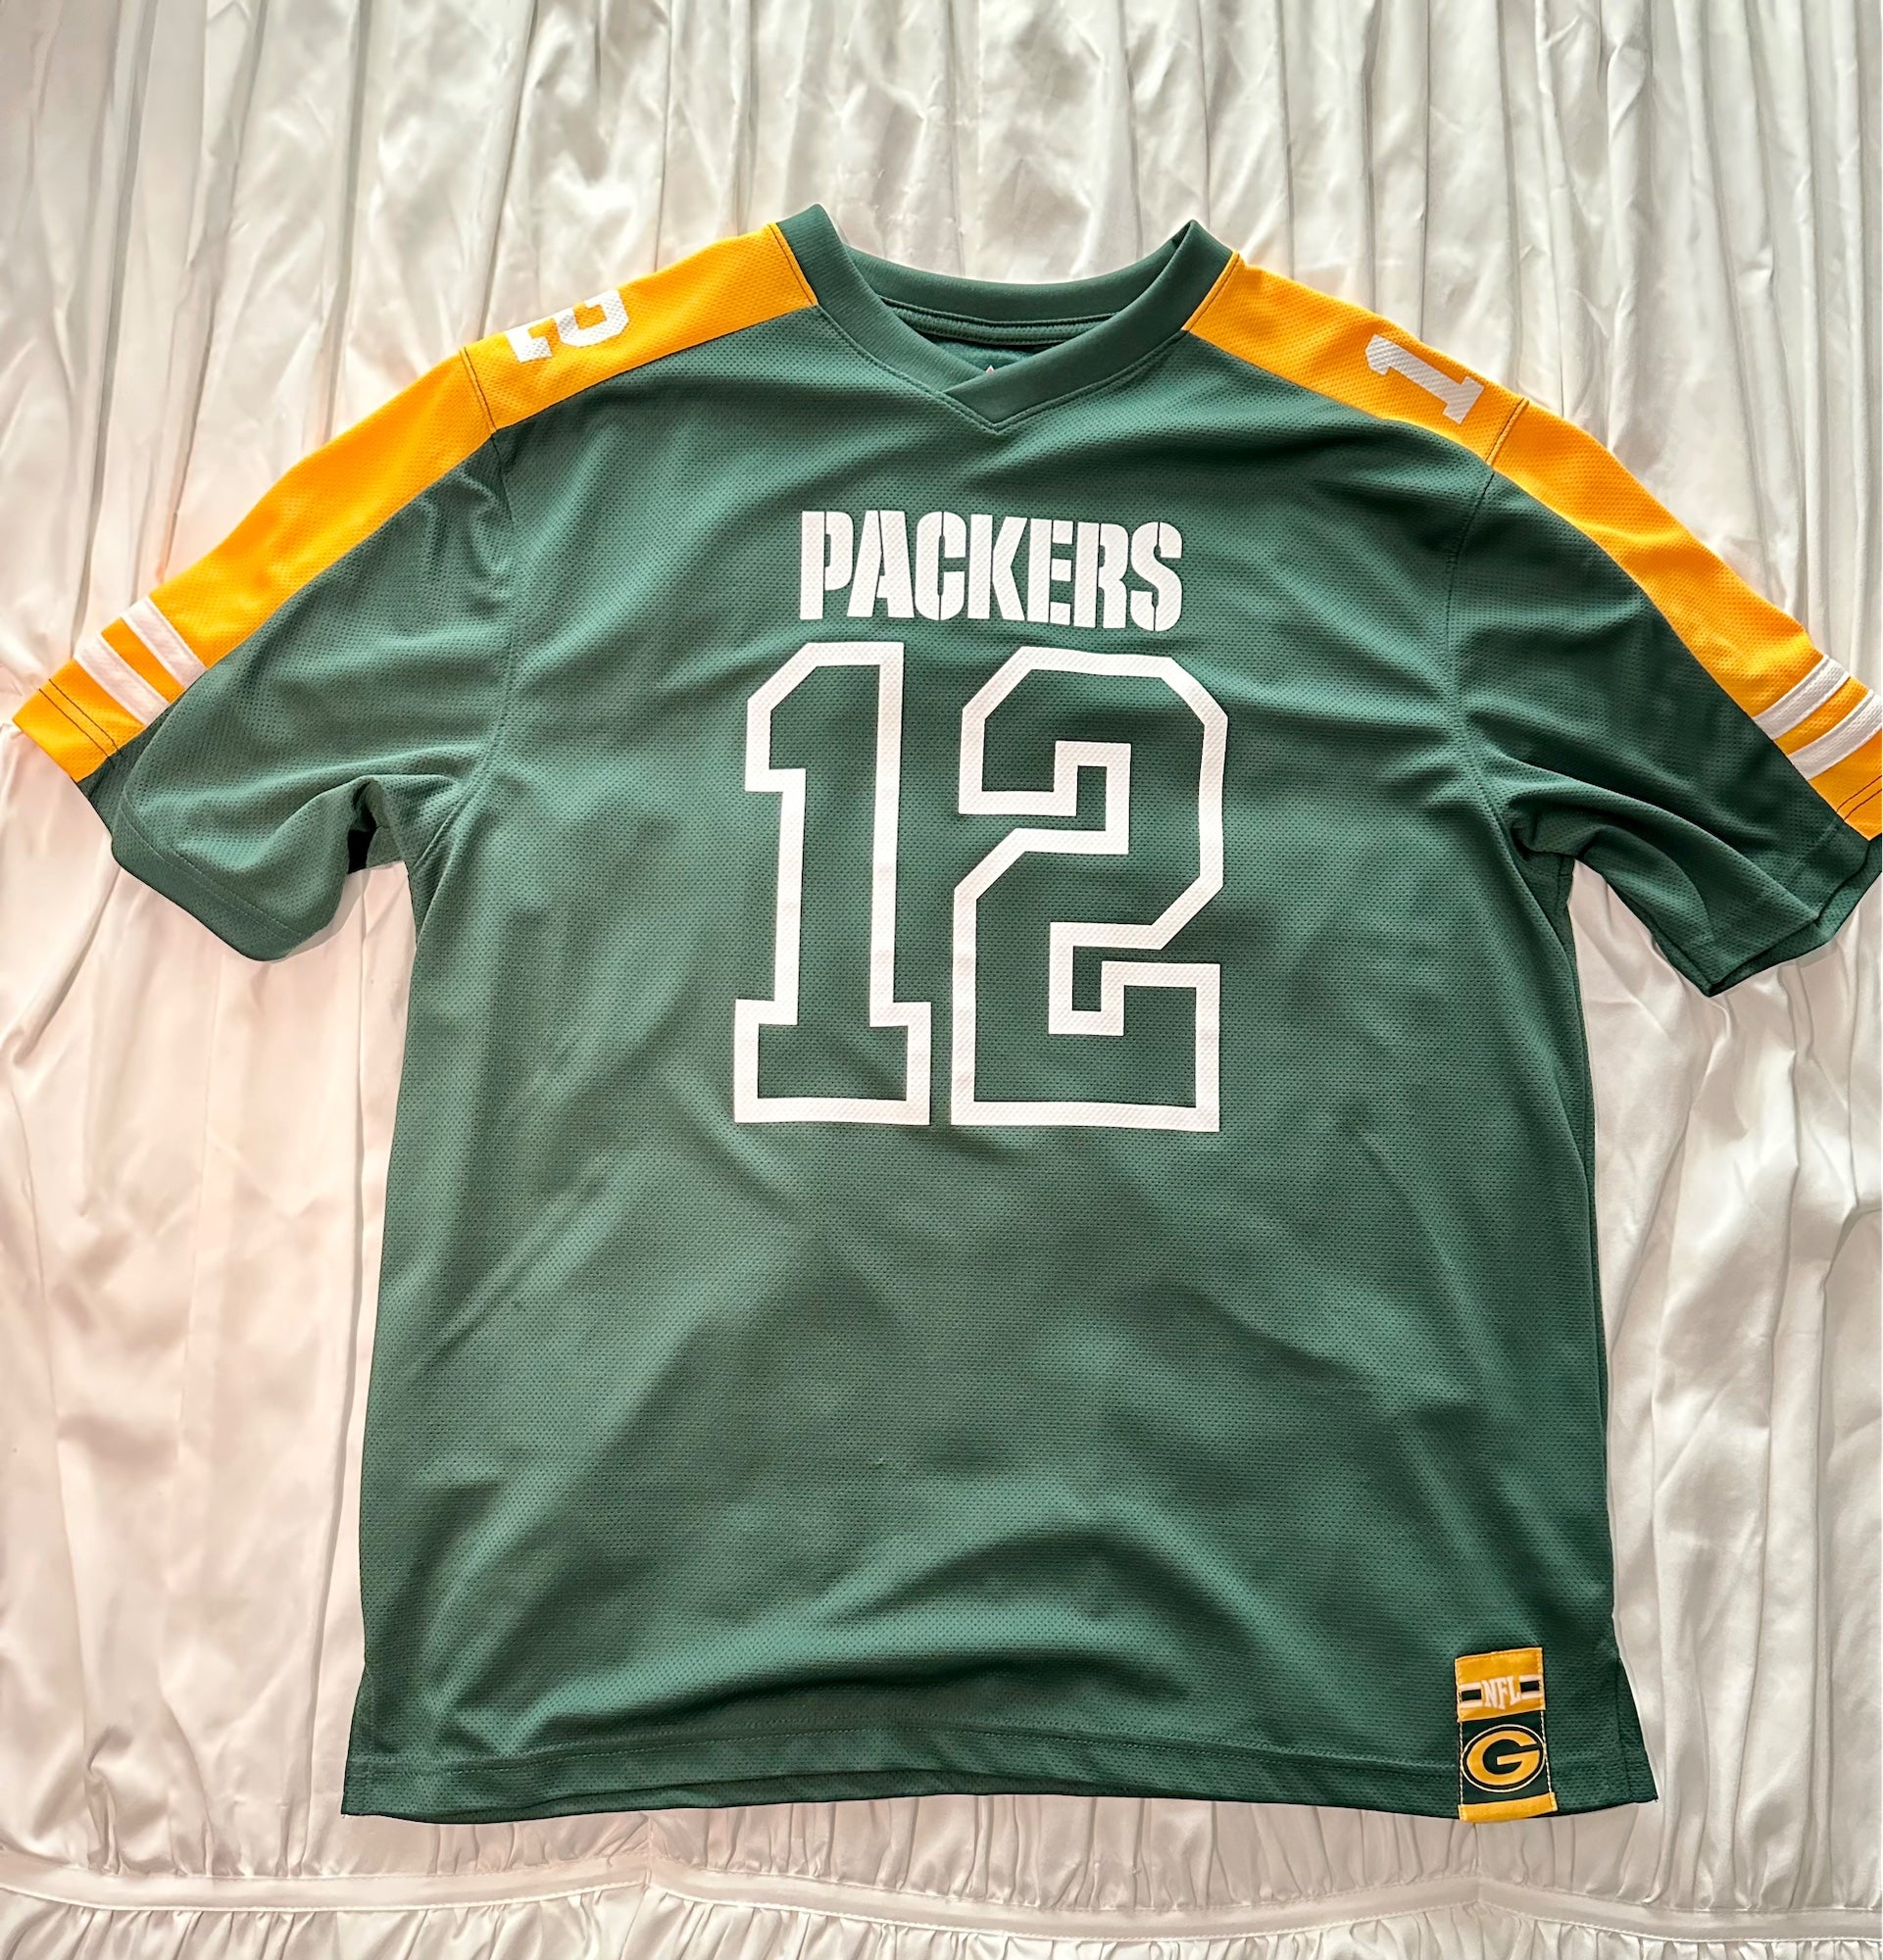 Men's Majestic NFL Packers jersey #12 Rodgers, Green mesh XL